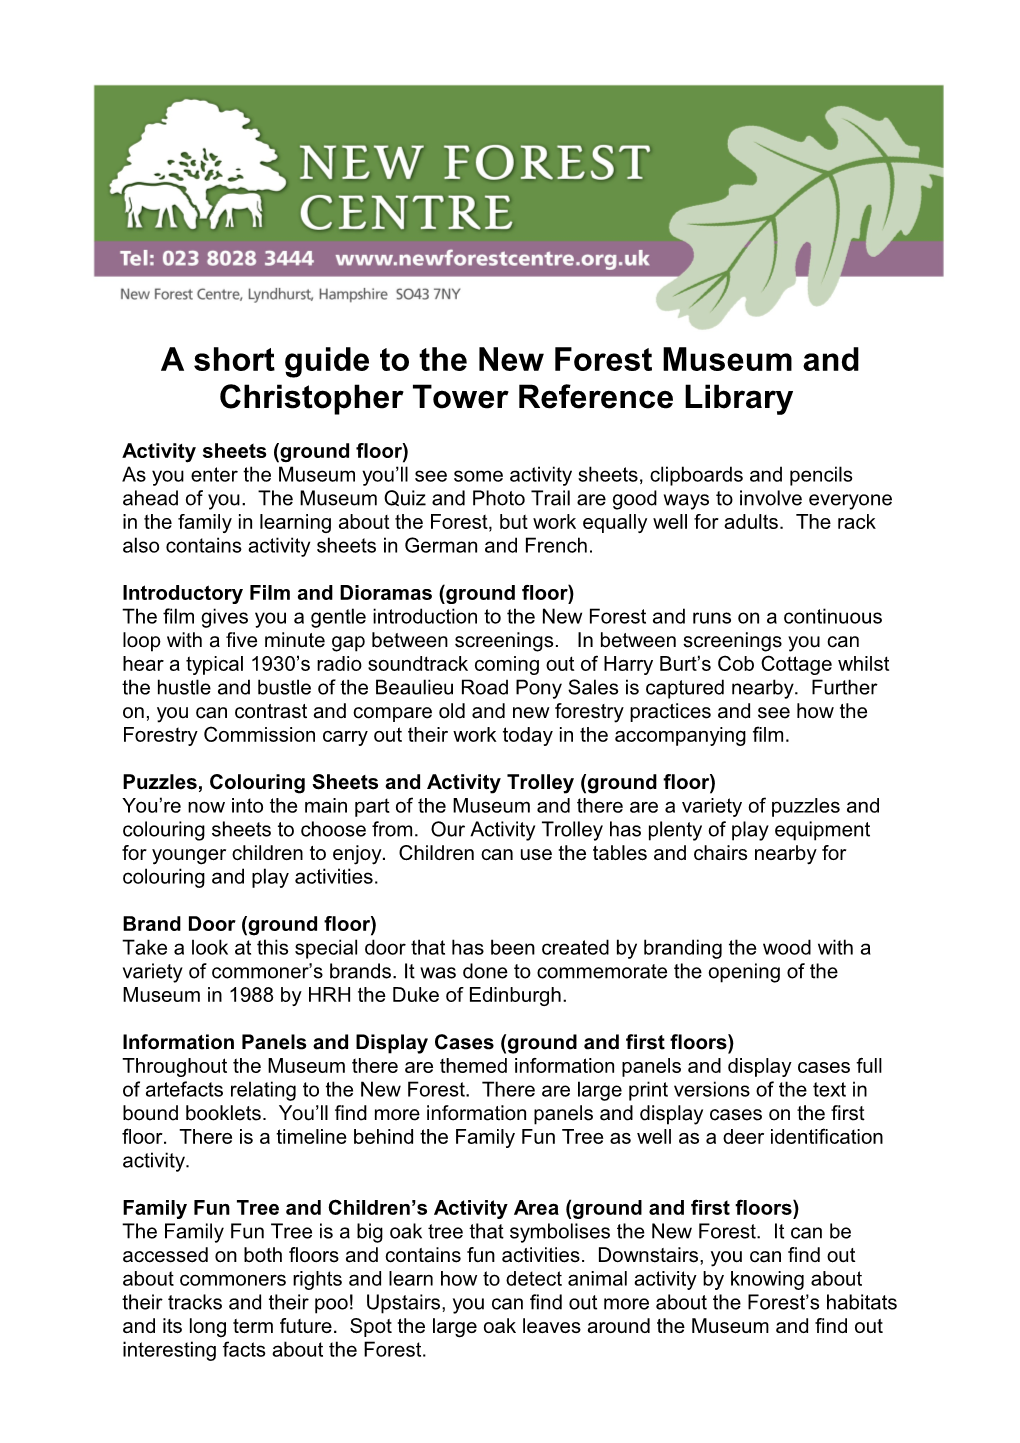 A Short Guide to the New Forest Museum and Christopher Tower Reference Library